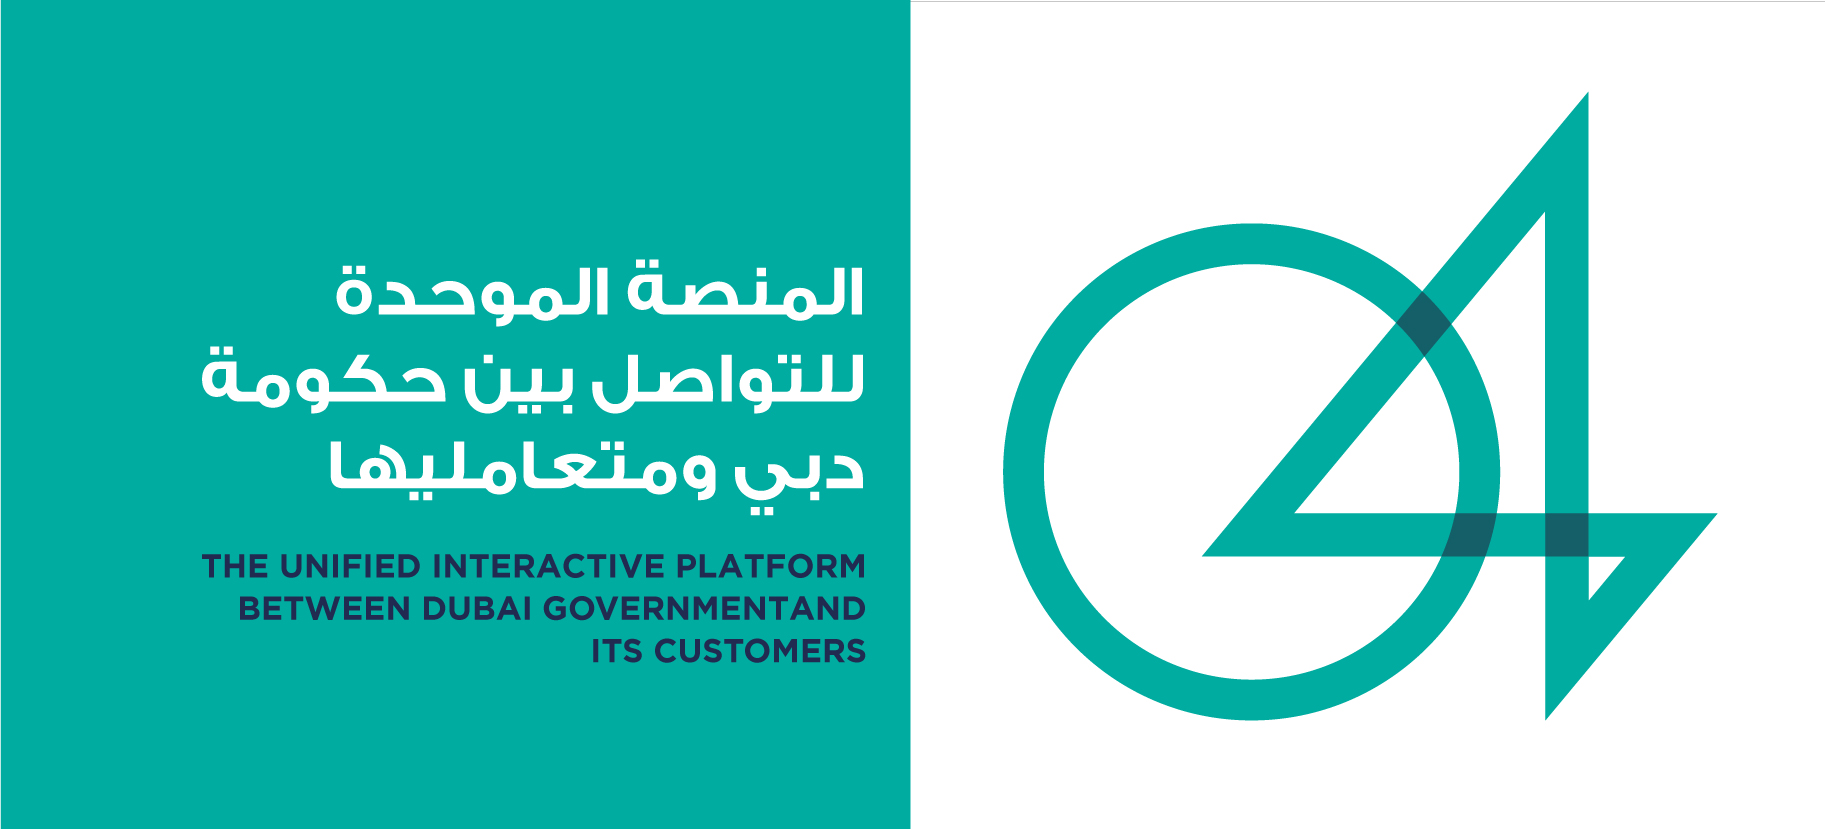 04 The Unified Interactive Platform between Dubai Government and its Customers